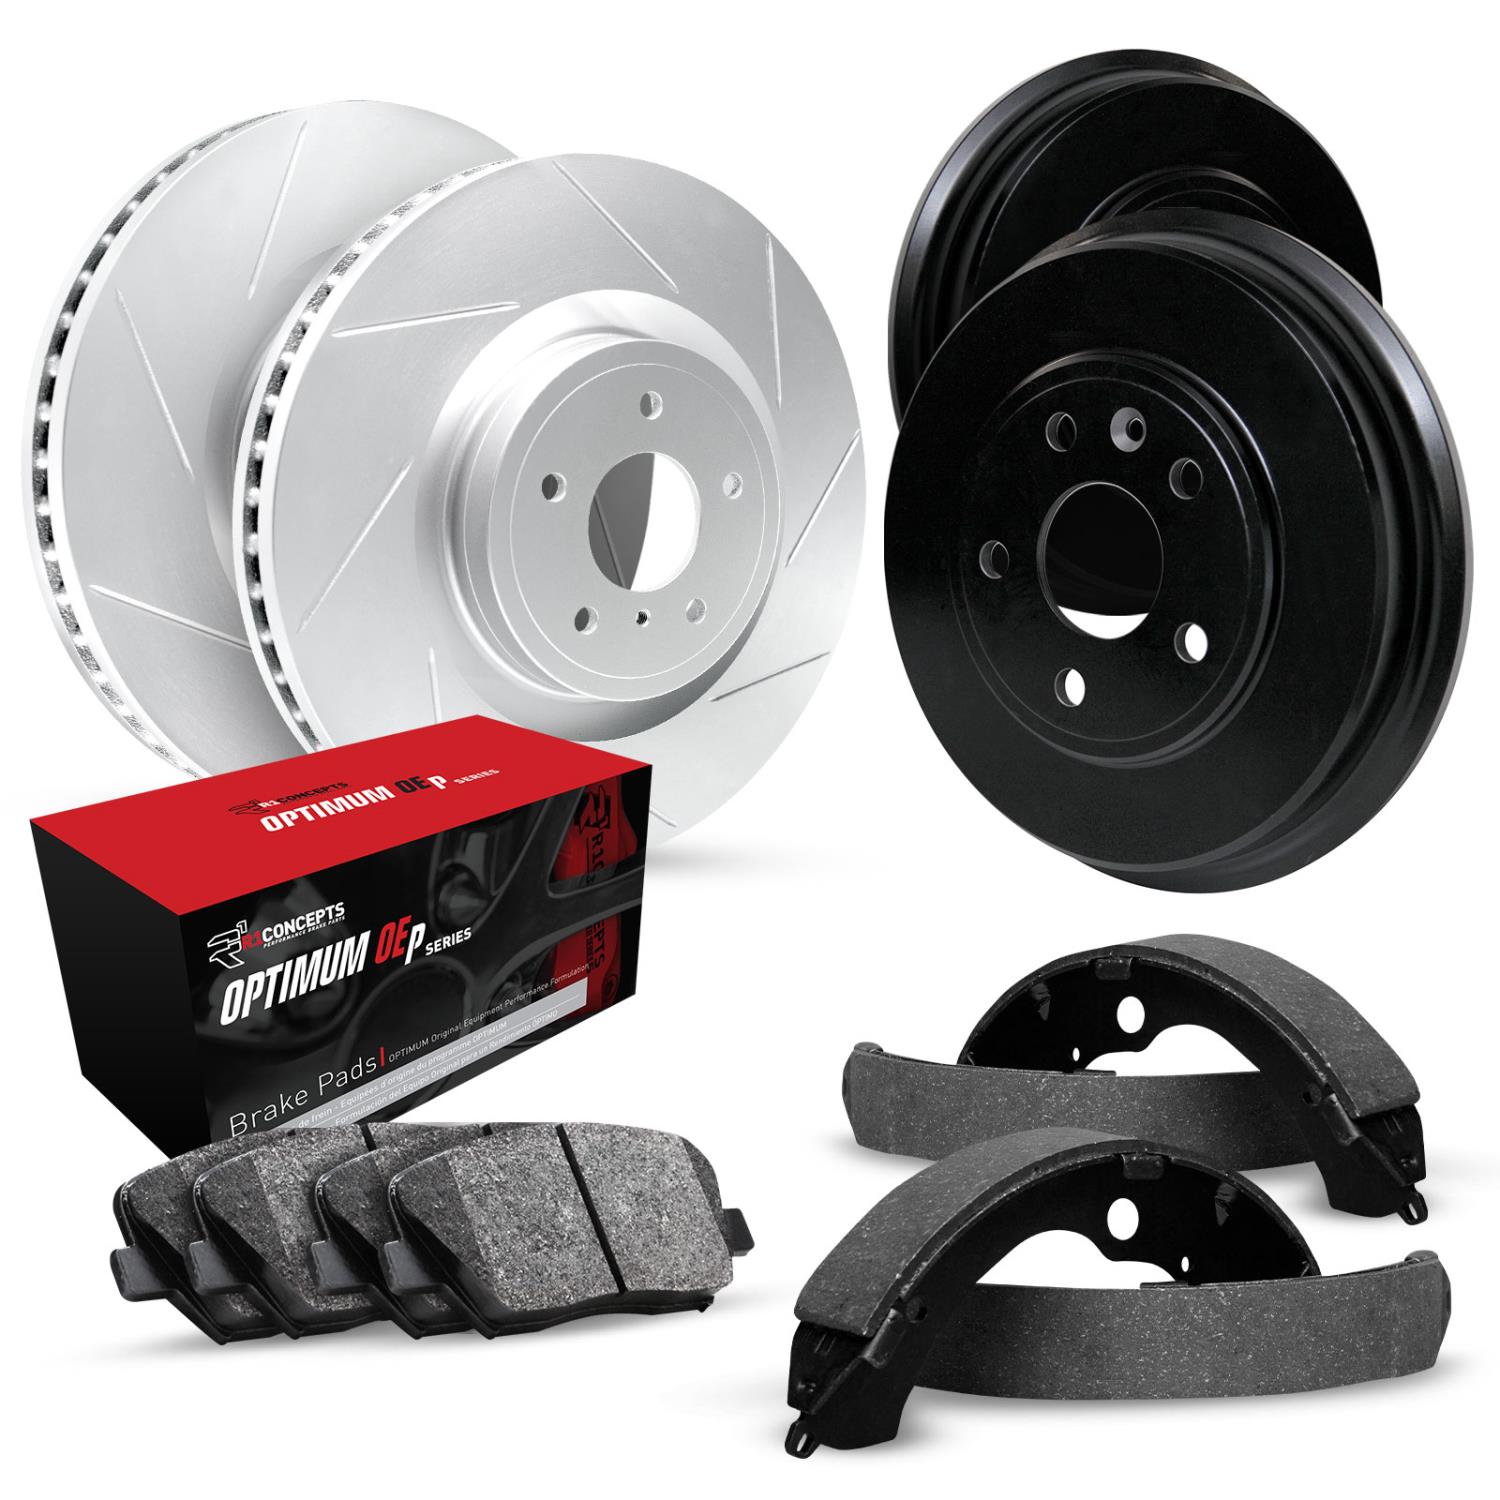 GEO-Carbon Slotted Brake Rotor & Drum Set w/Optimum OE Pads & Shoes, 1965-1966 Ford/Lincoln/Mercury/Mazda